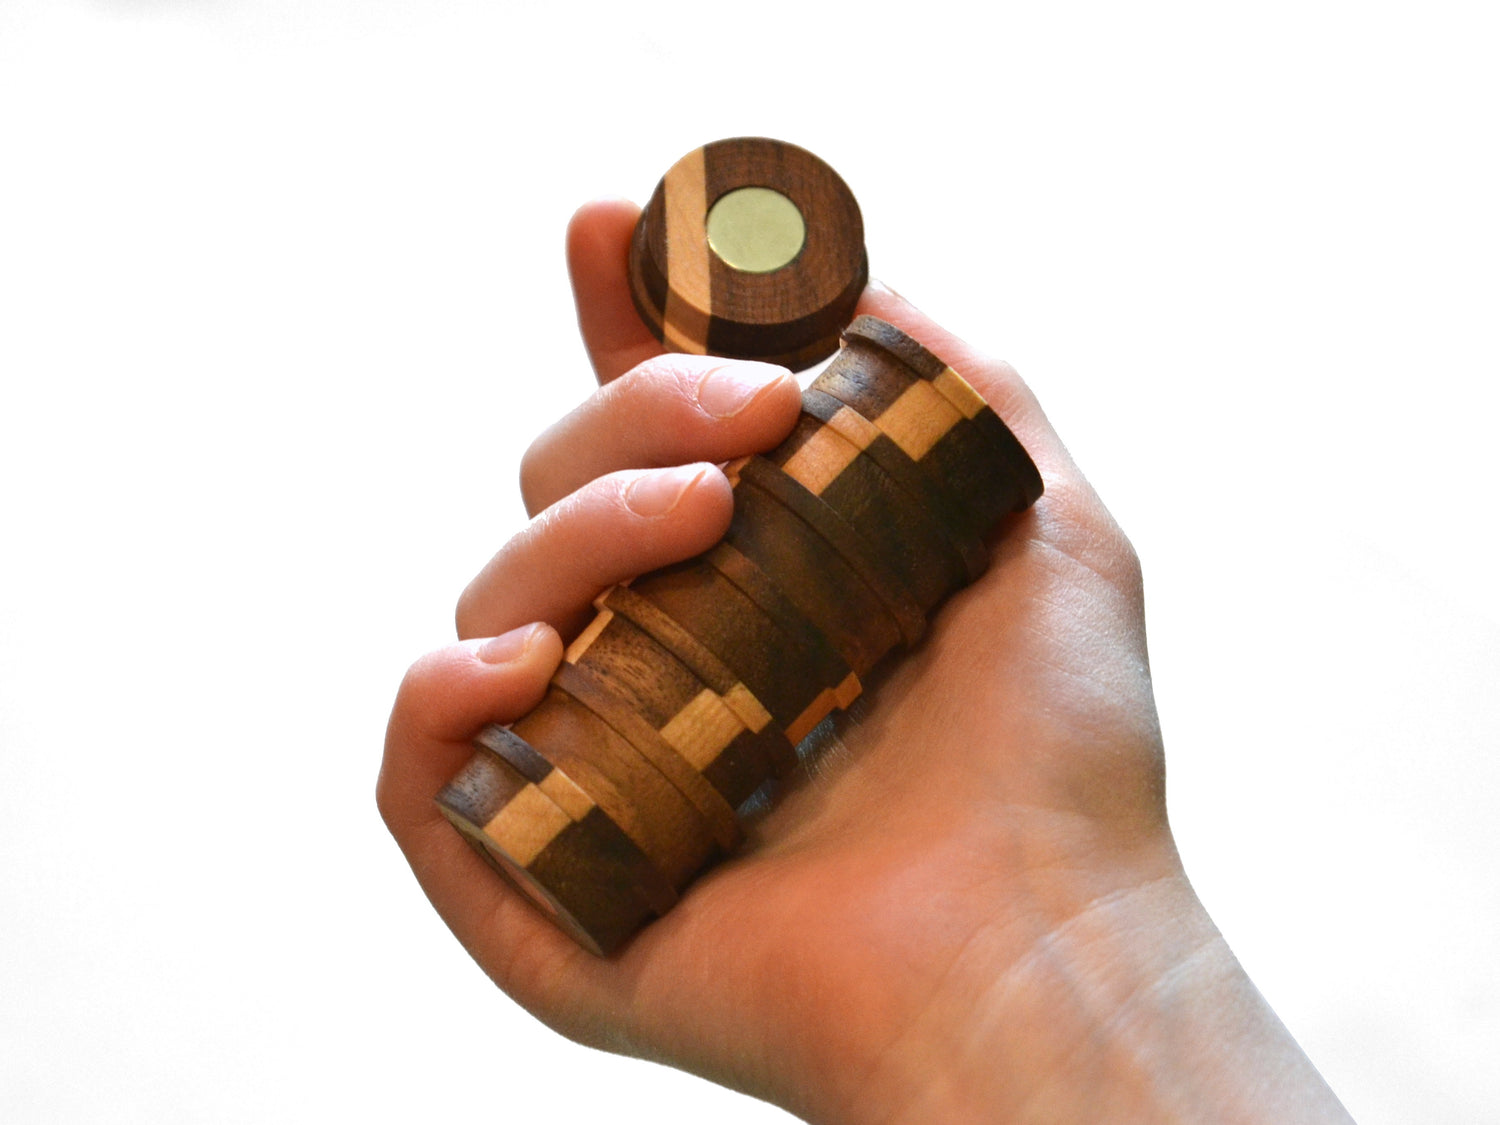 holding a set of strong wooden magnets